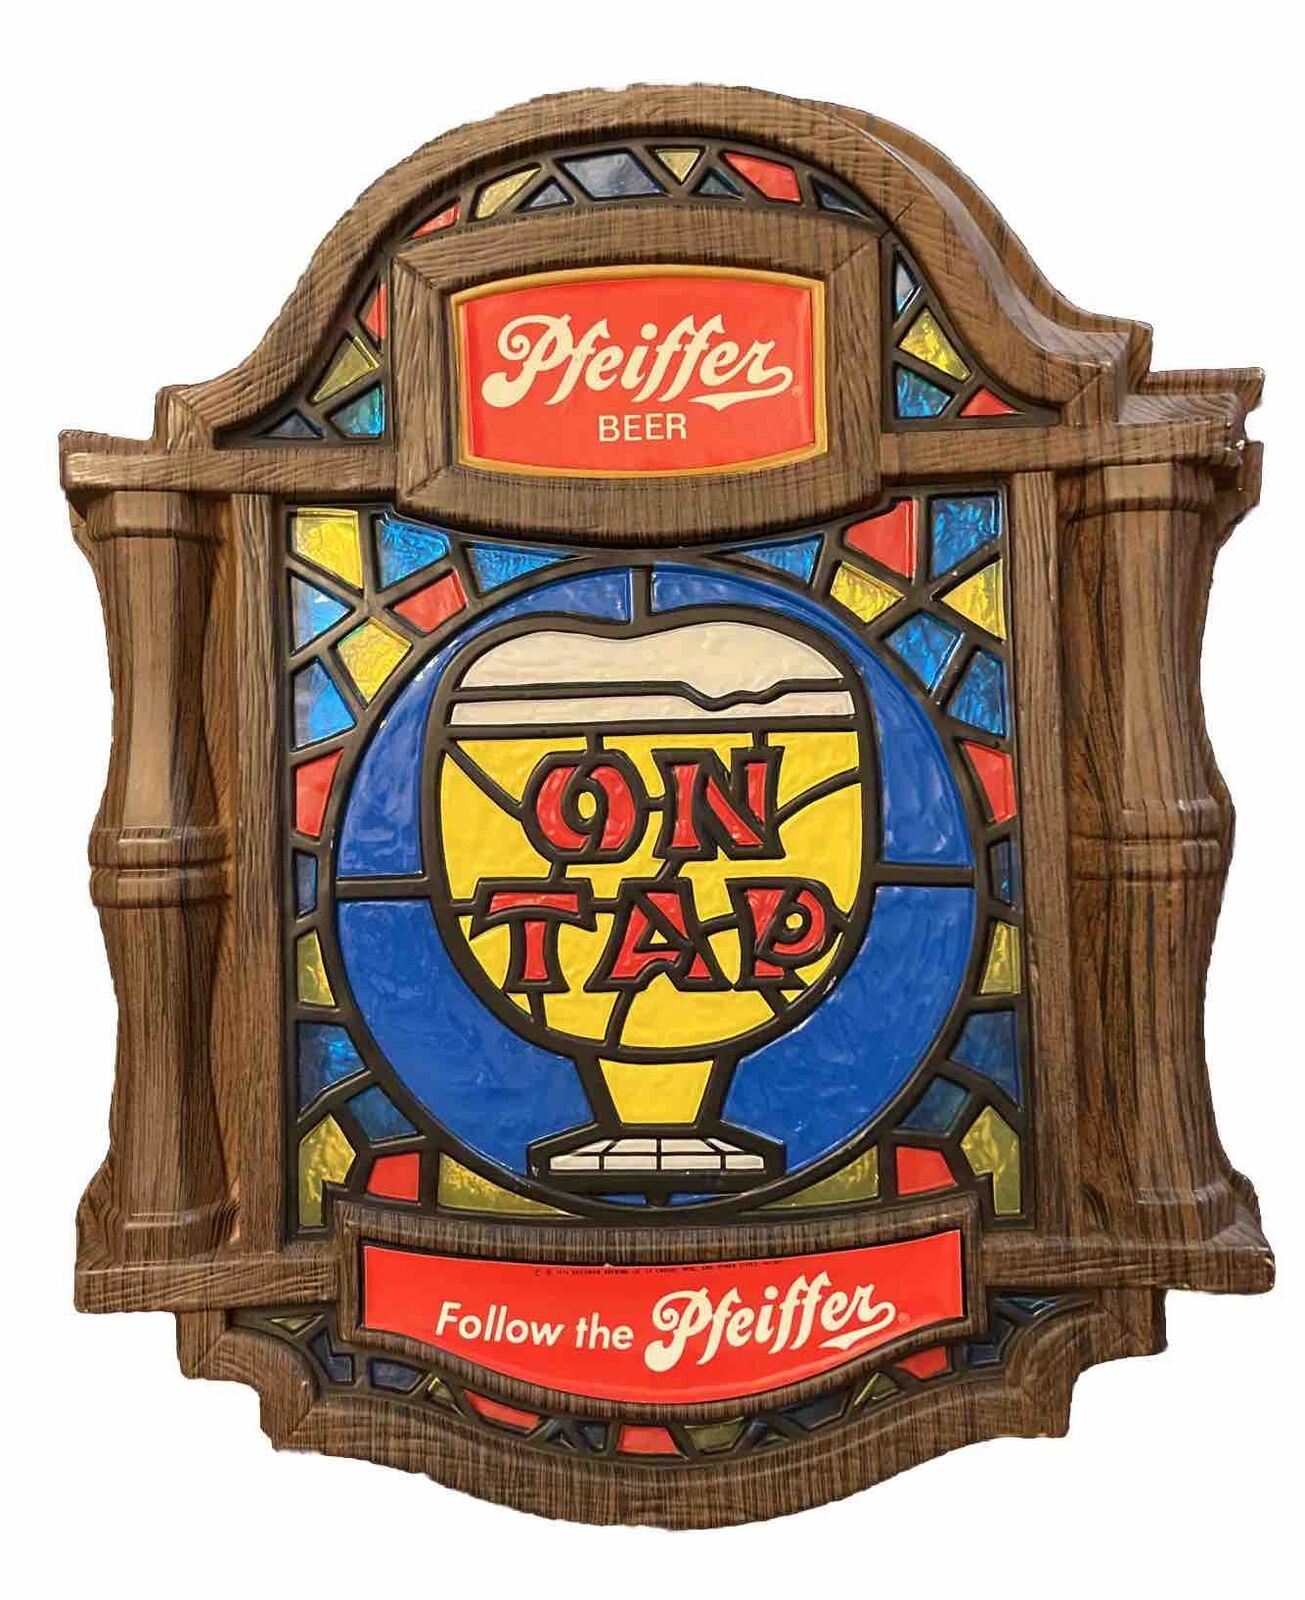 Vintage 1976 Pfeiffer Beer Bar Sign - Stained Glass Look (plastic) 16x14 Inches